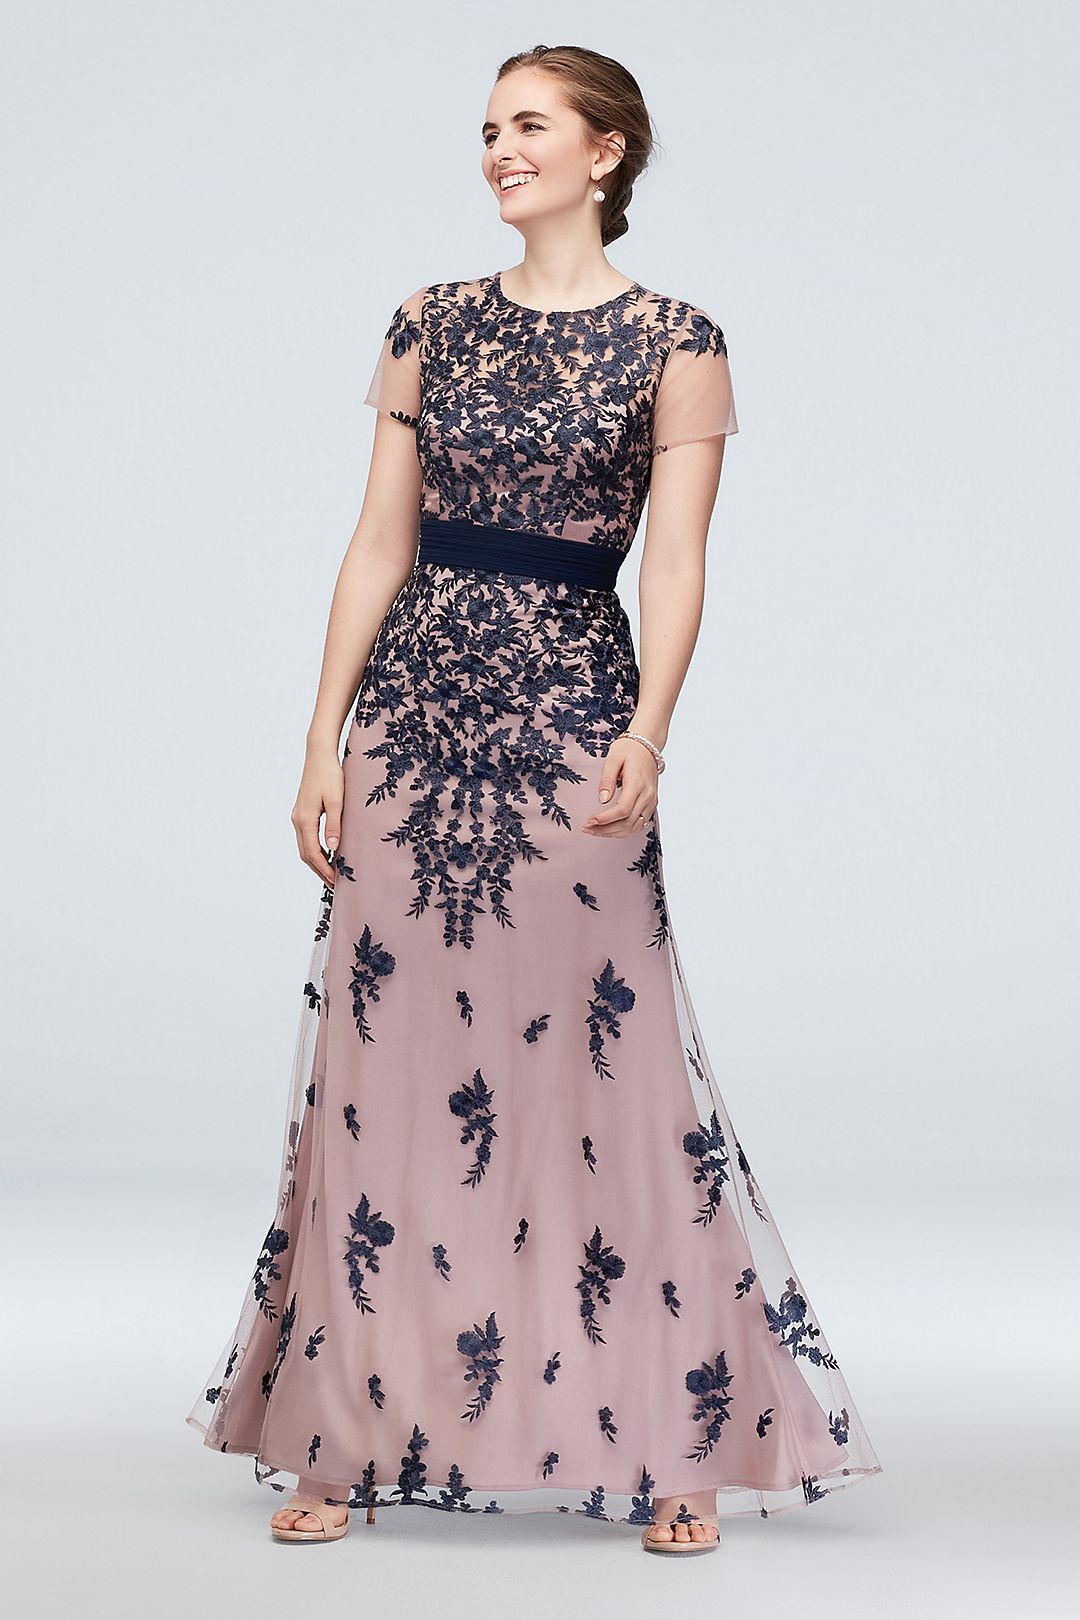 Cascading Floral Embroidery Mesh Gown with Belt Image 1